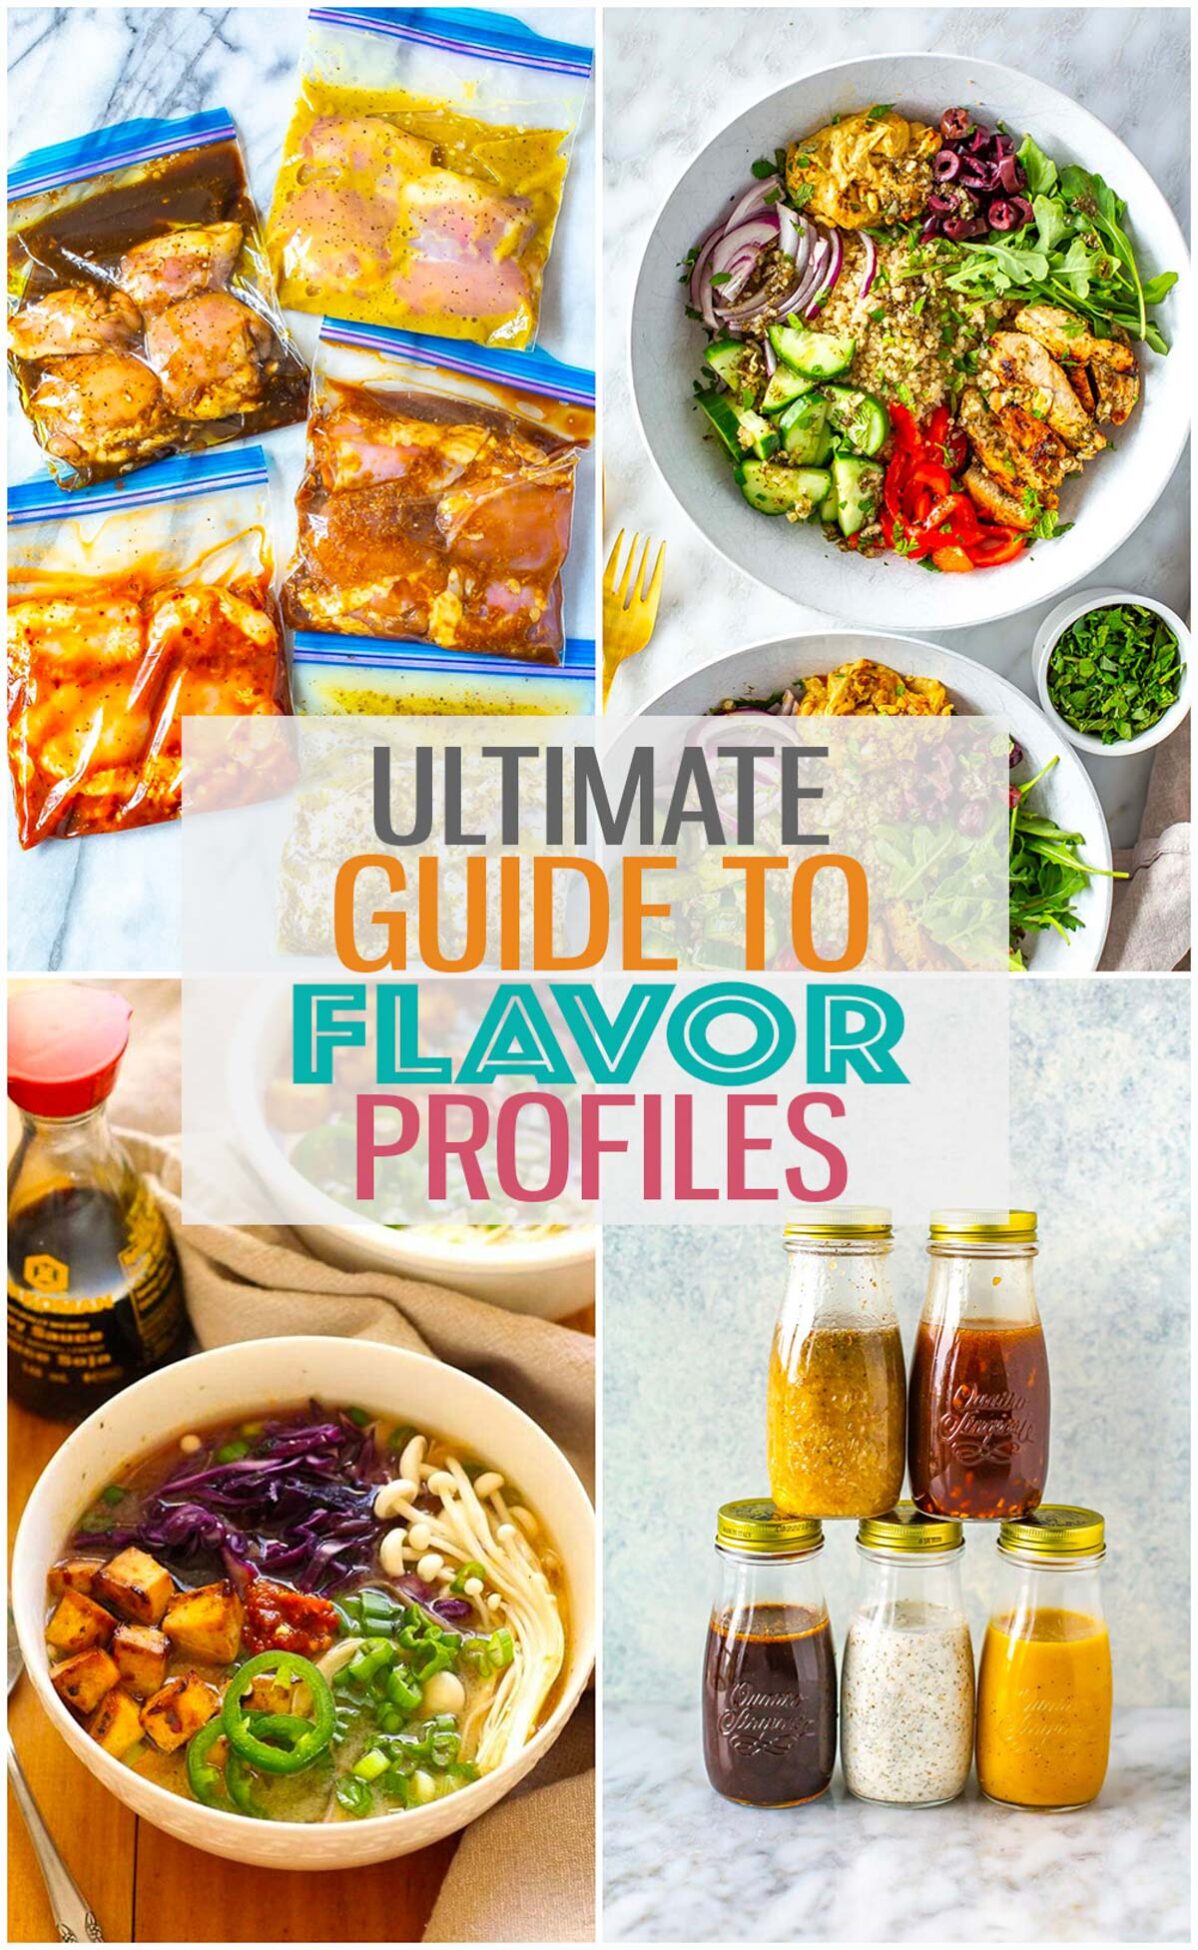 A collage with marinades, bowls and dressings with the text "Ultimate Guide to Flavor Profiles" layered over top.